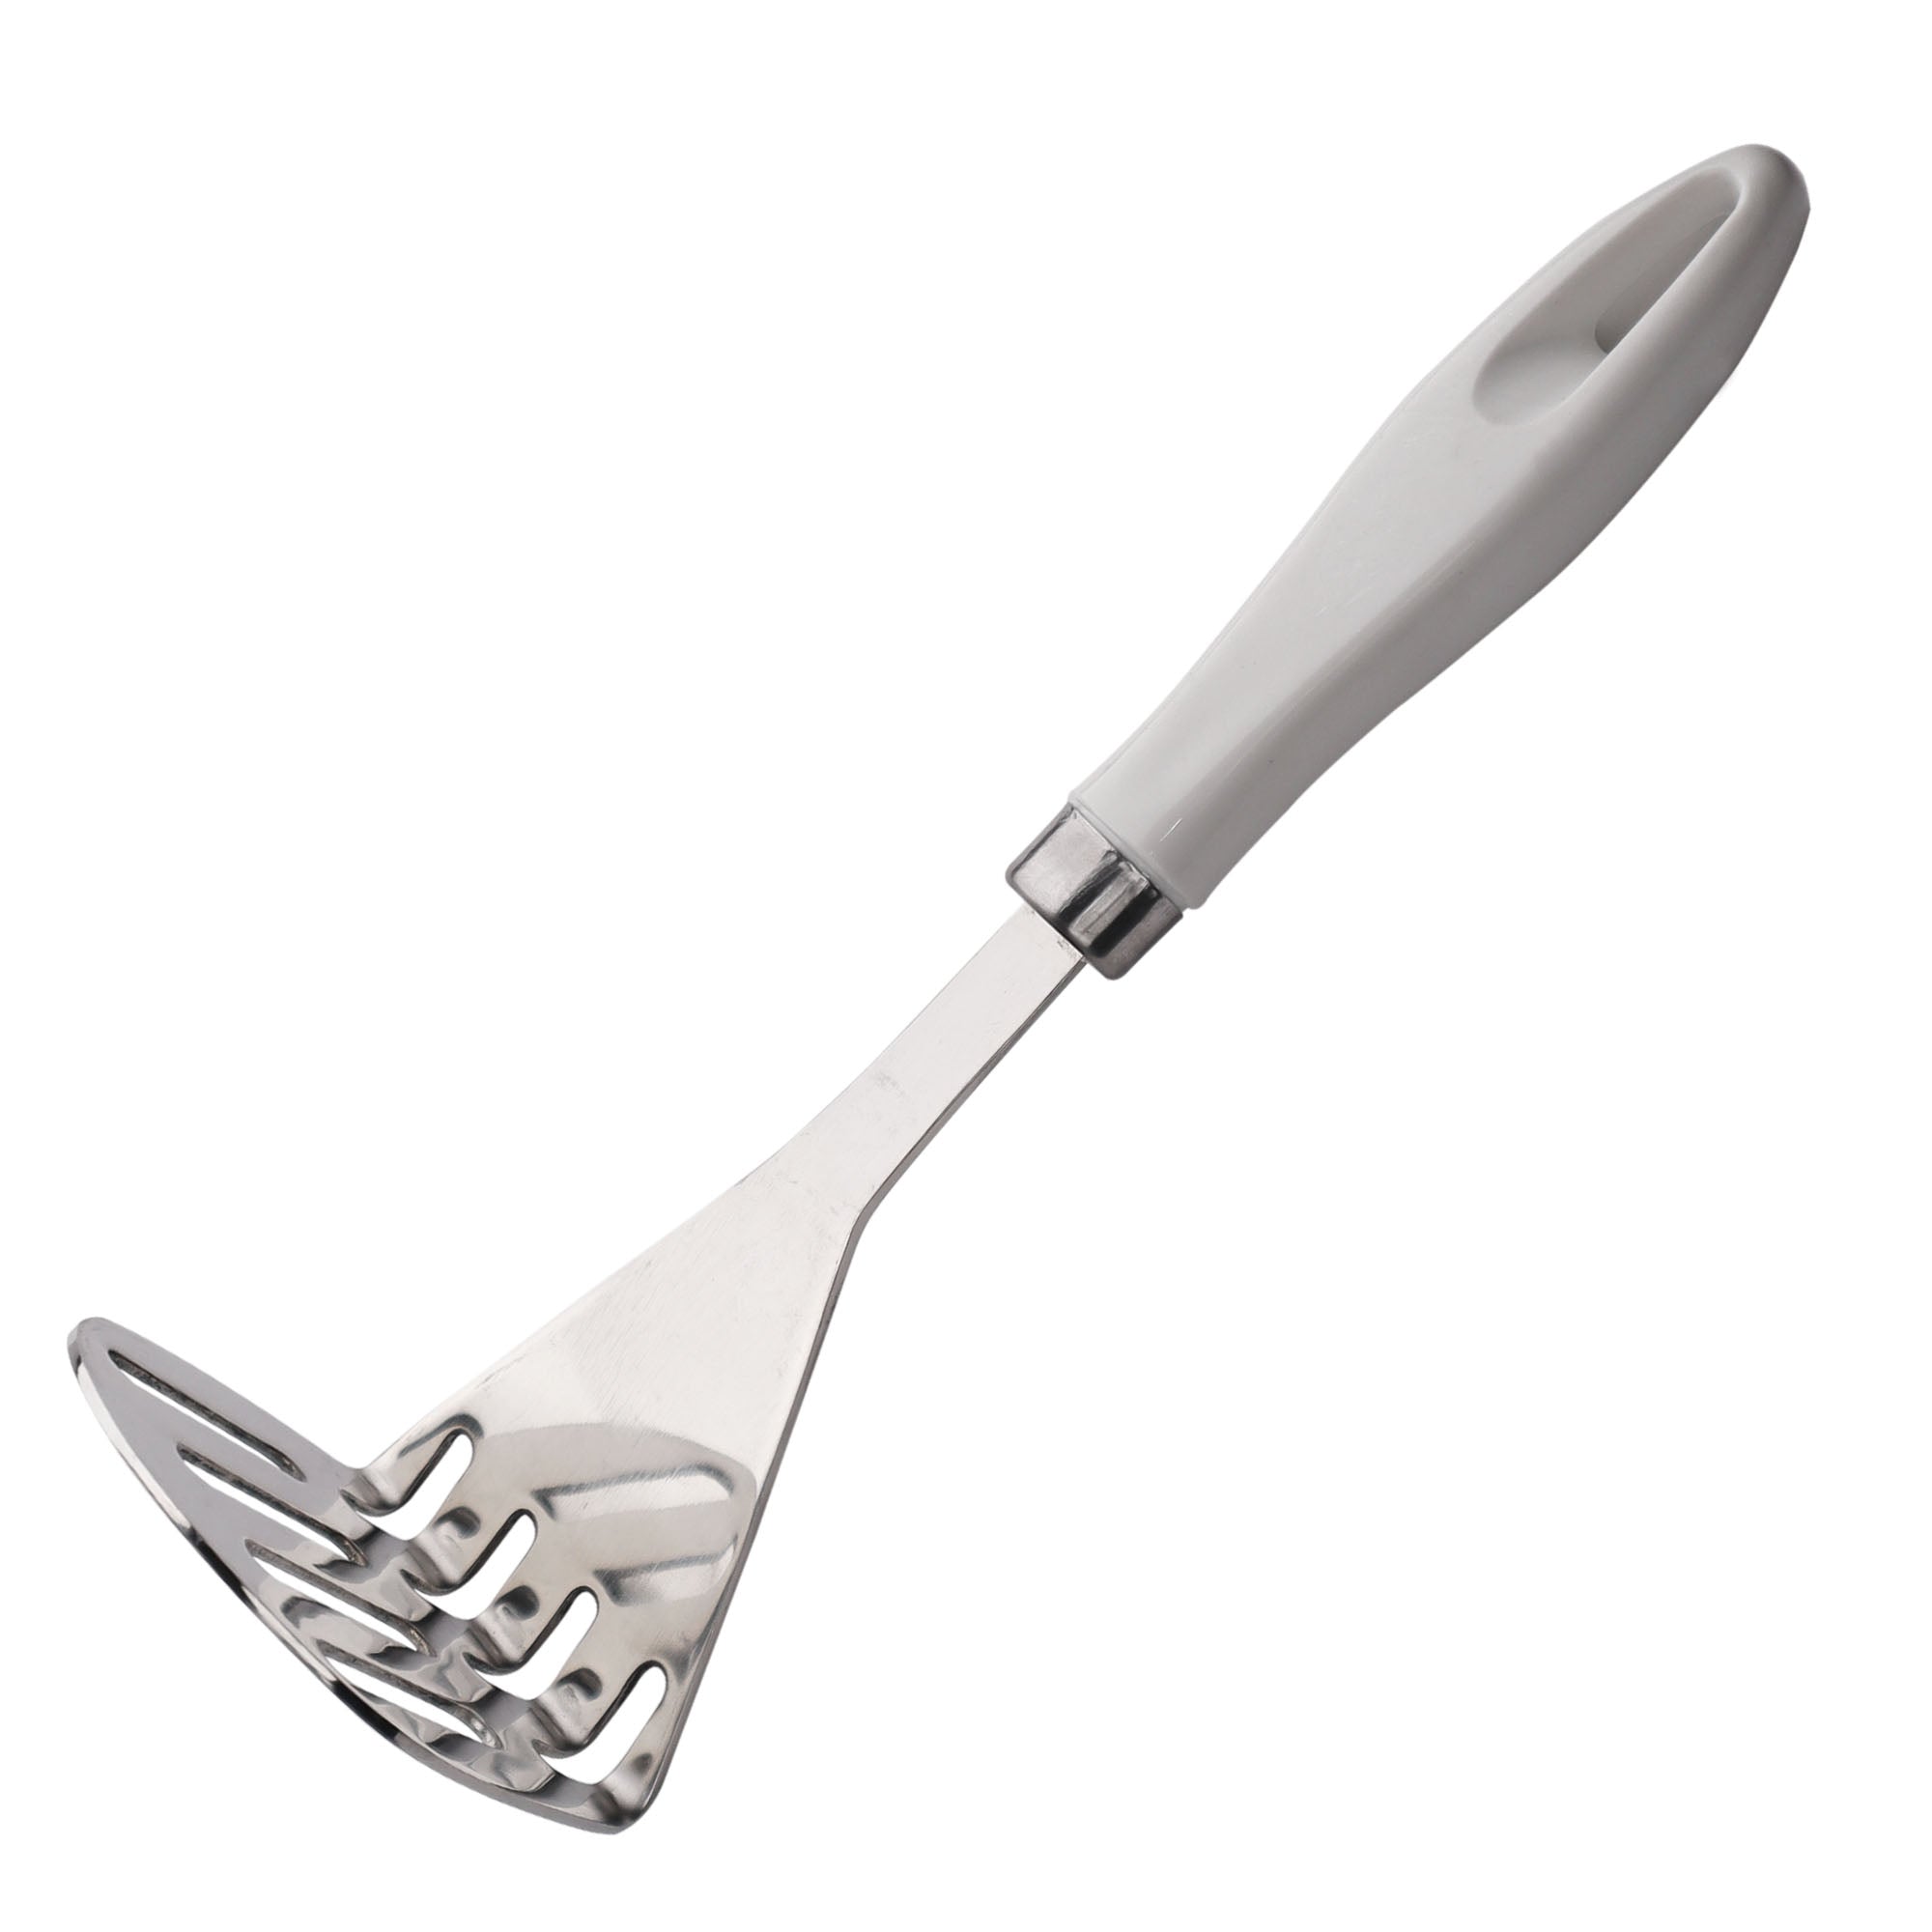 Chef Stainless Steel Potato Masher with White Handle 